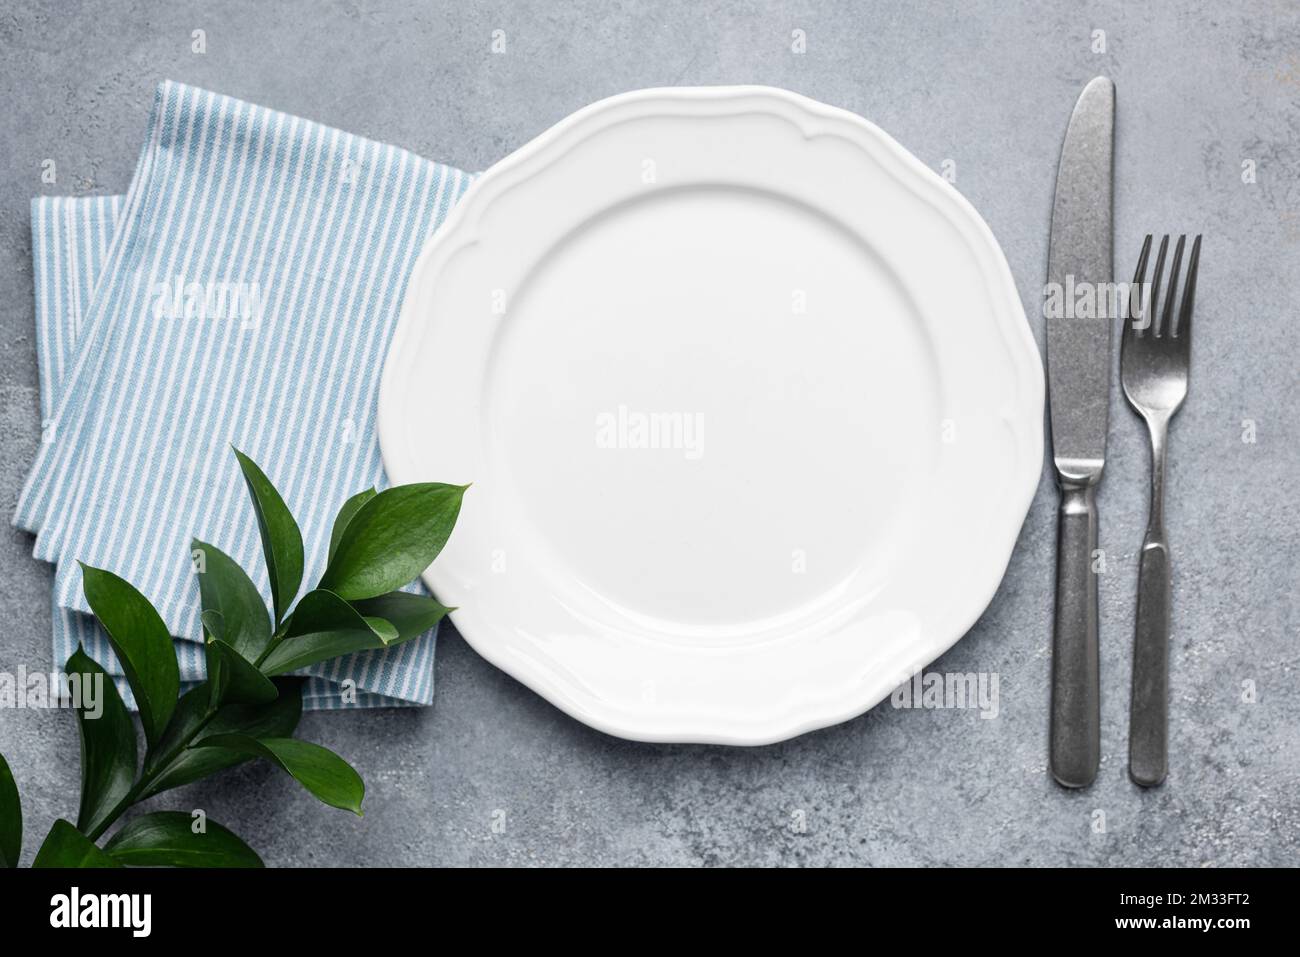 White plate with silverware and napkin. Table setting, elegant dining plate. Top view, copy space Stock Photo